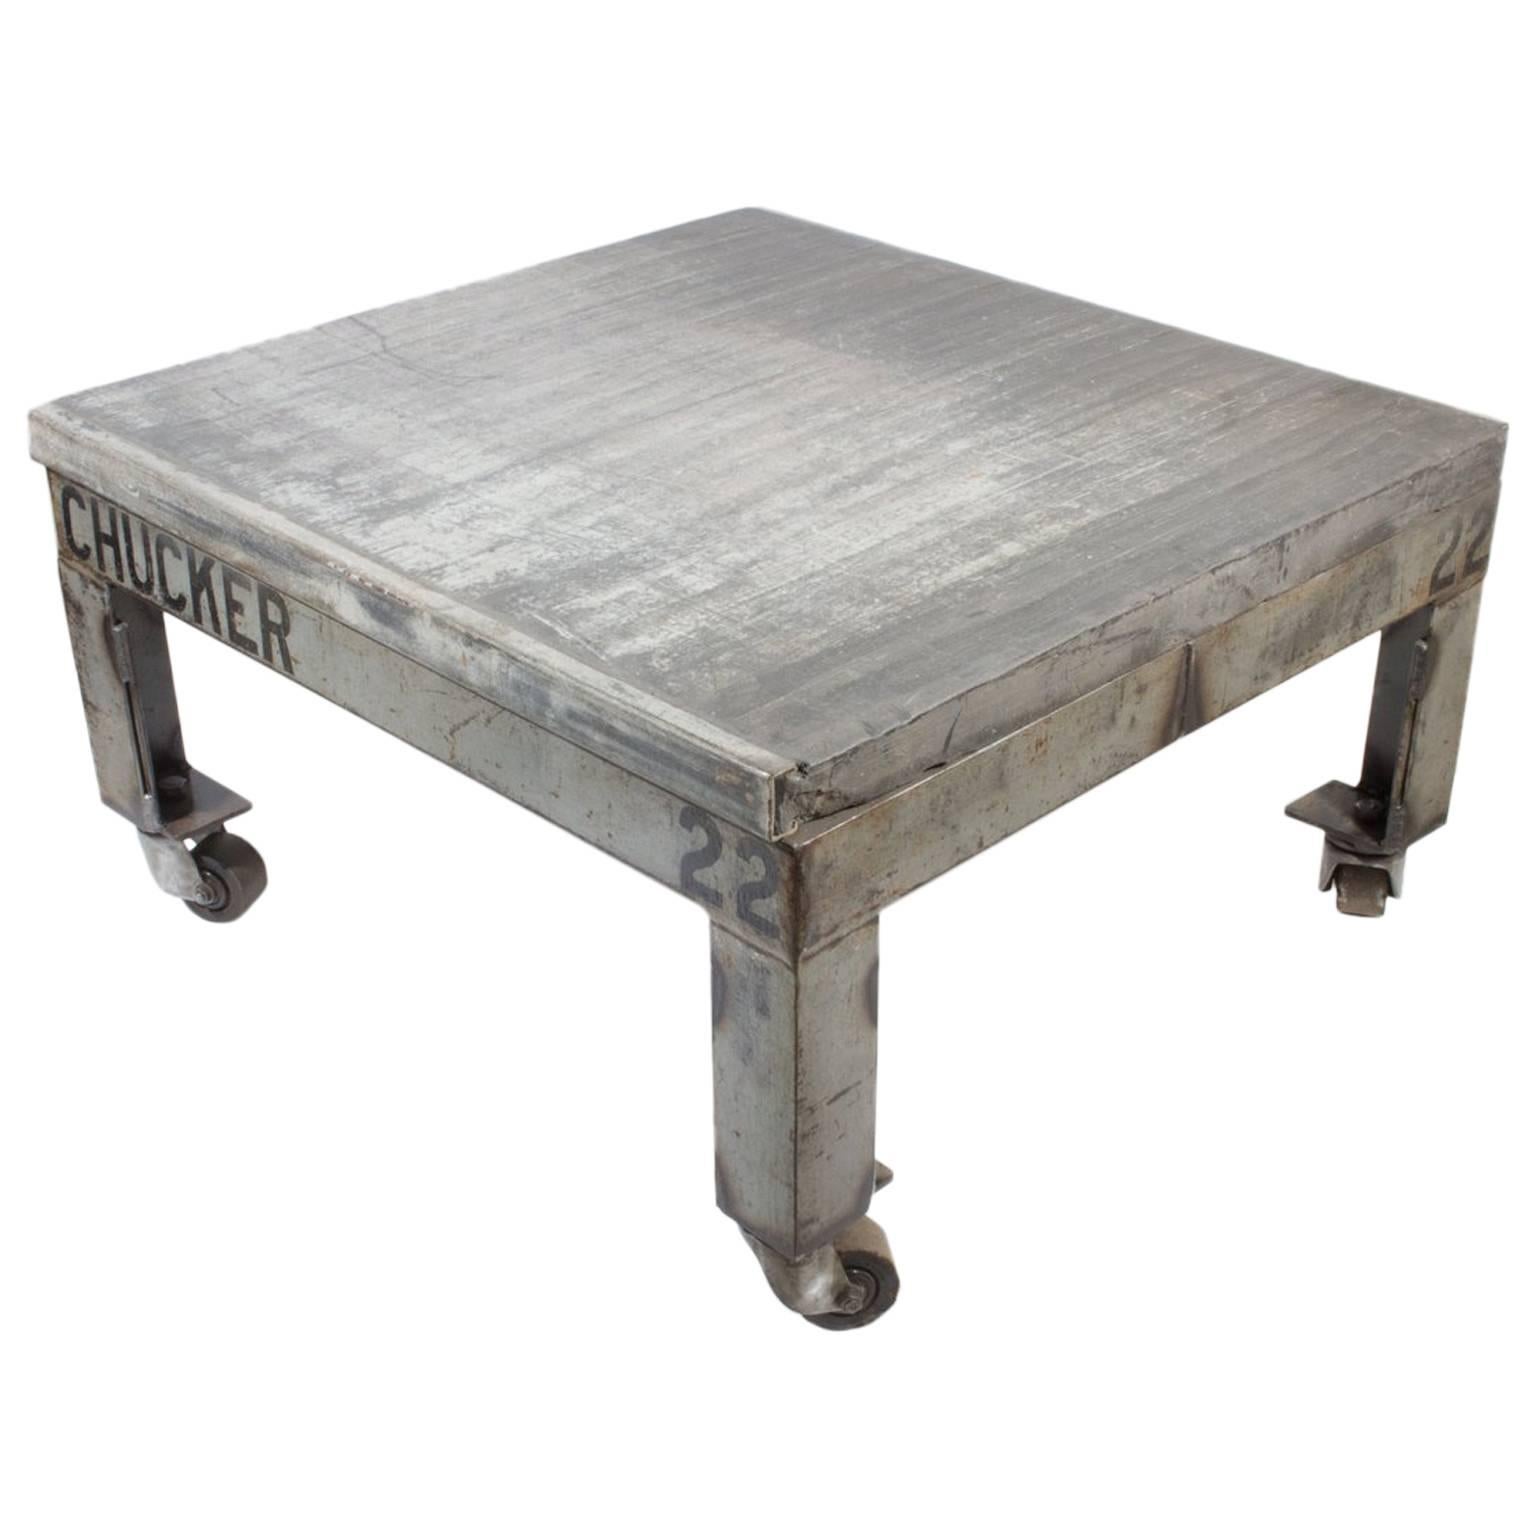 Vintage Belgian Bricklayer's Pallet Industrial Square Cocktail Table with Wheels